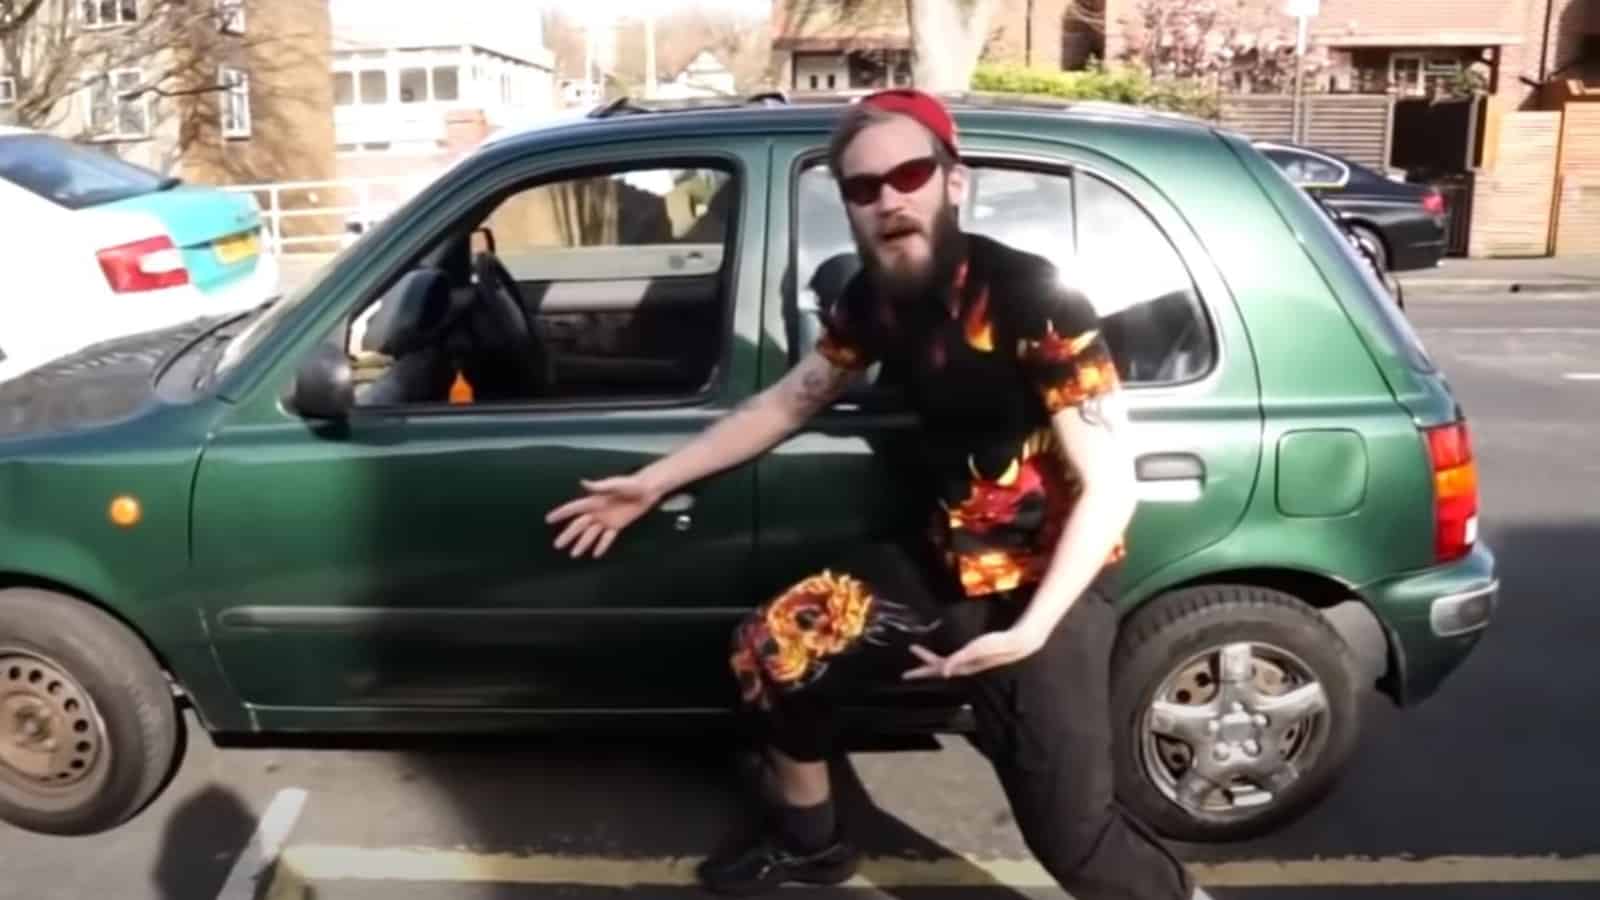 PewDiePie poses with his Nissan in My New Car video YouTube